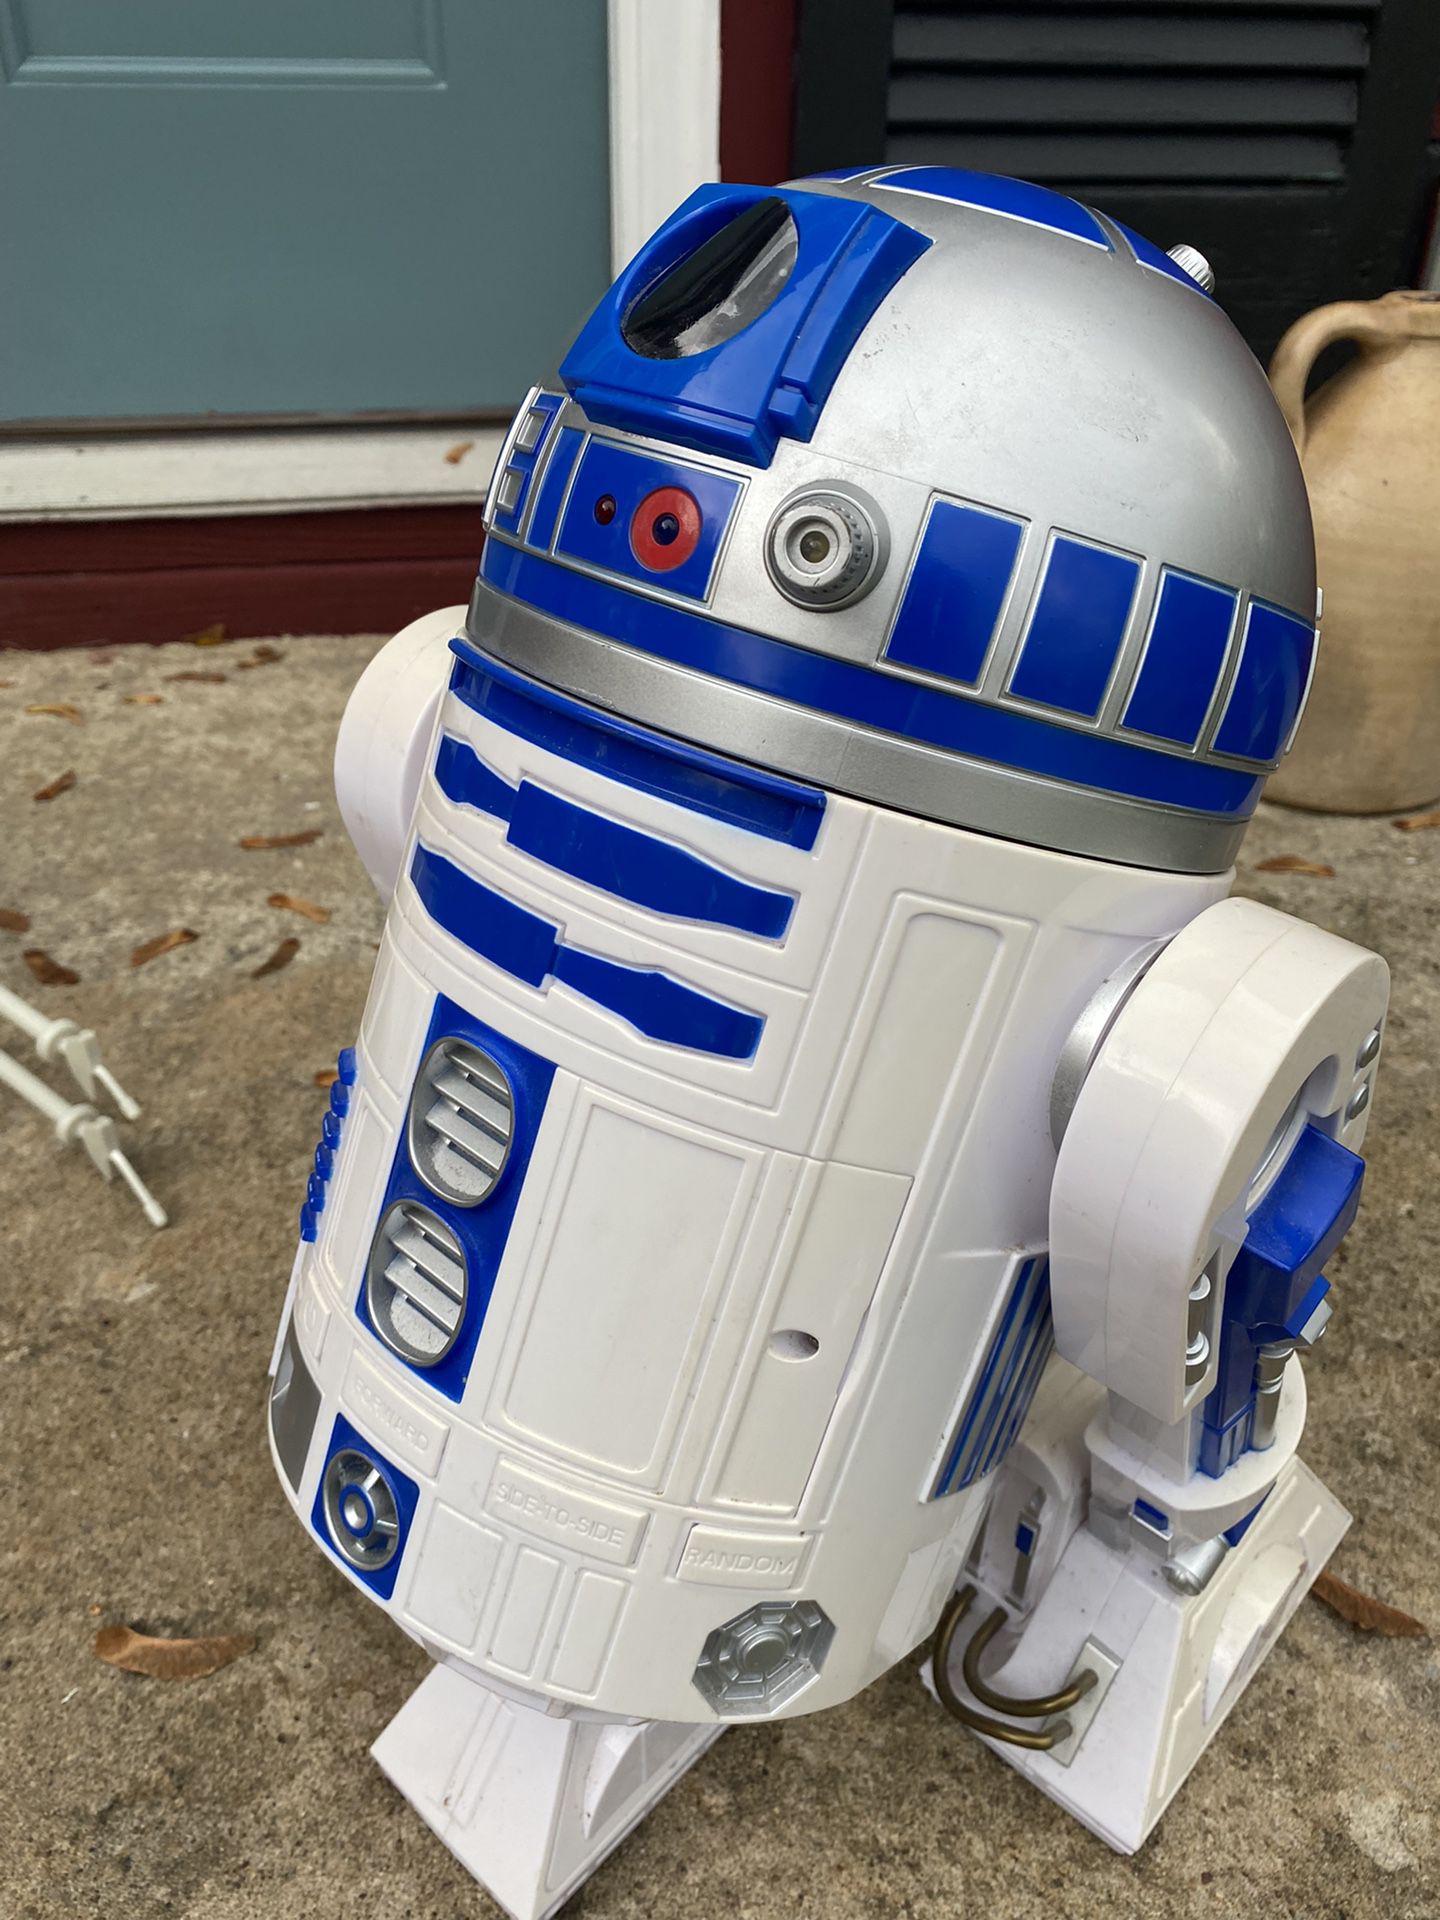 Star Wars R2D2 Bubble Machine 16 Inches Tall Rotate 90° With Sounds And Light. Bubble not working 